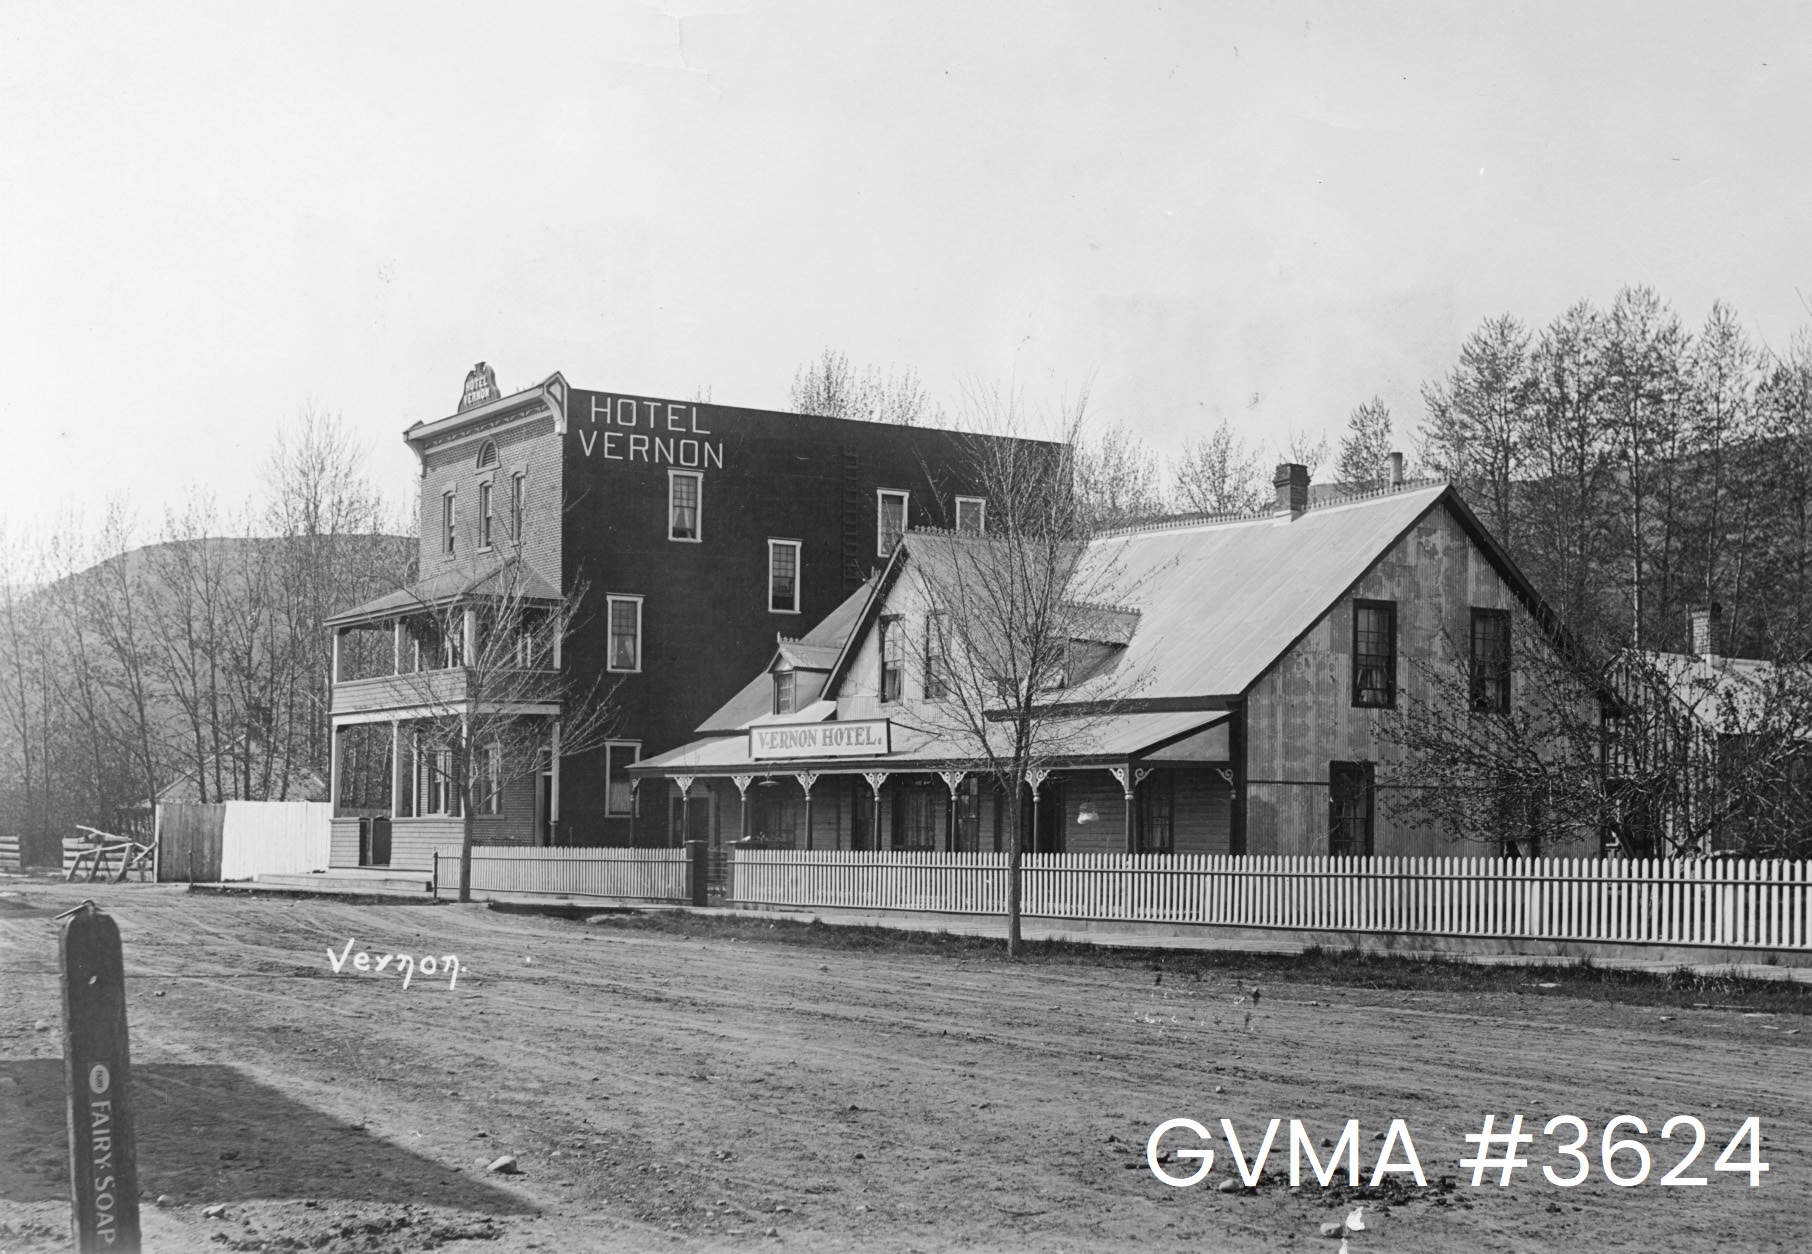 A black and white image of two buildings on the side a dirt road. The structure in the foreground, the Vernon Hotel, is shorter while the Hotel Vernon next to it is three-stories tall.